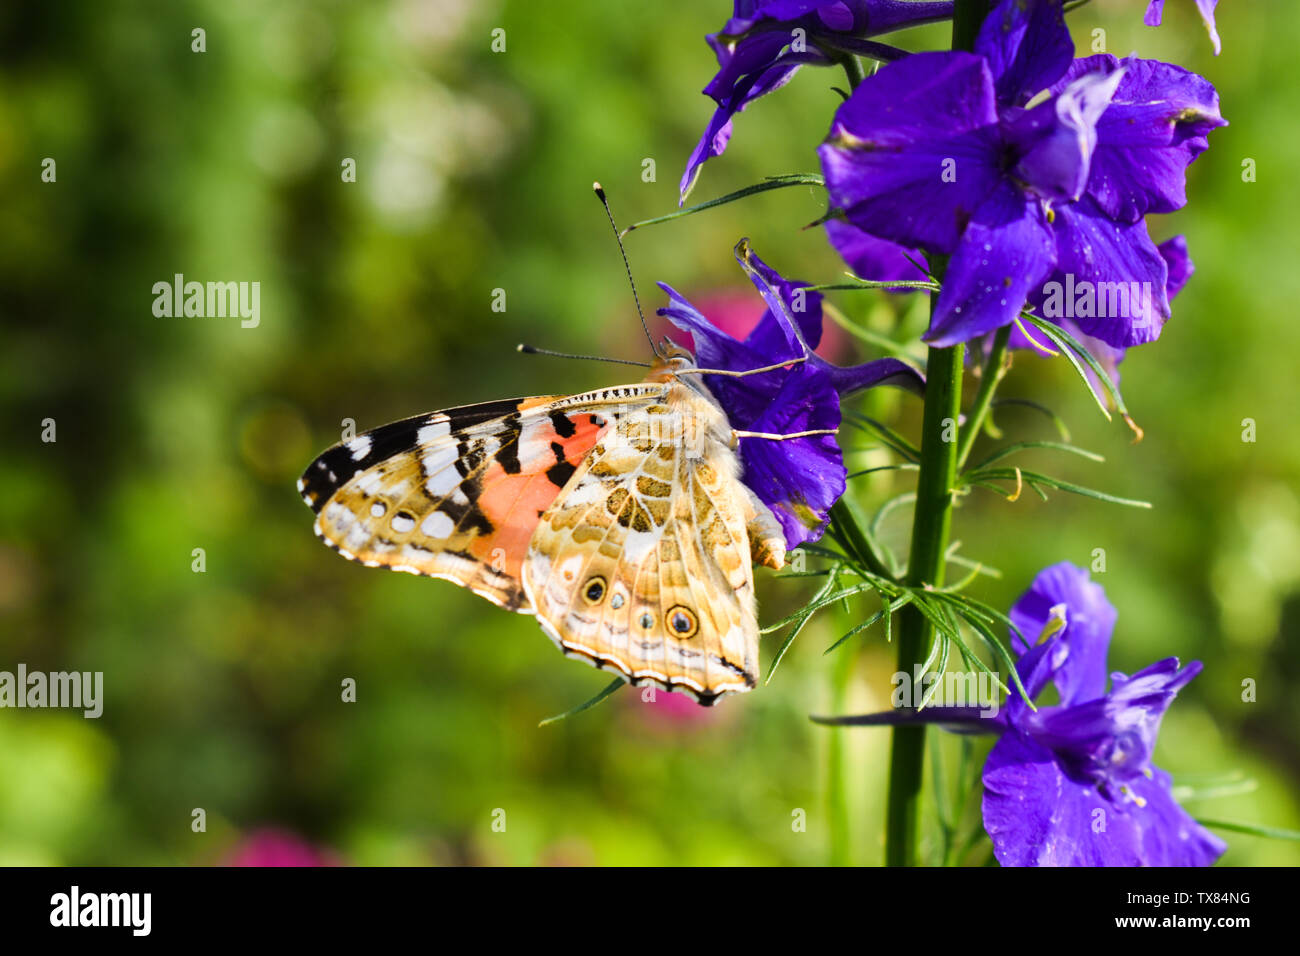 Danaus genutia, the common tiger sitting on the flower in the garden. Close-up macro styled stock photography of colorful butterfly on blooming flower Stock Photo